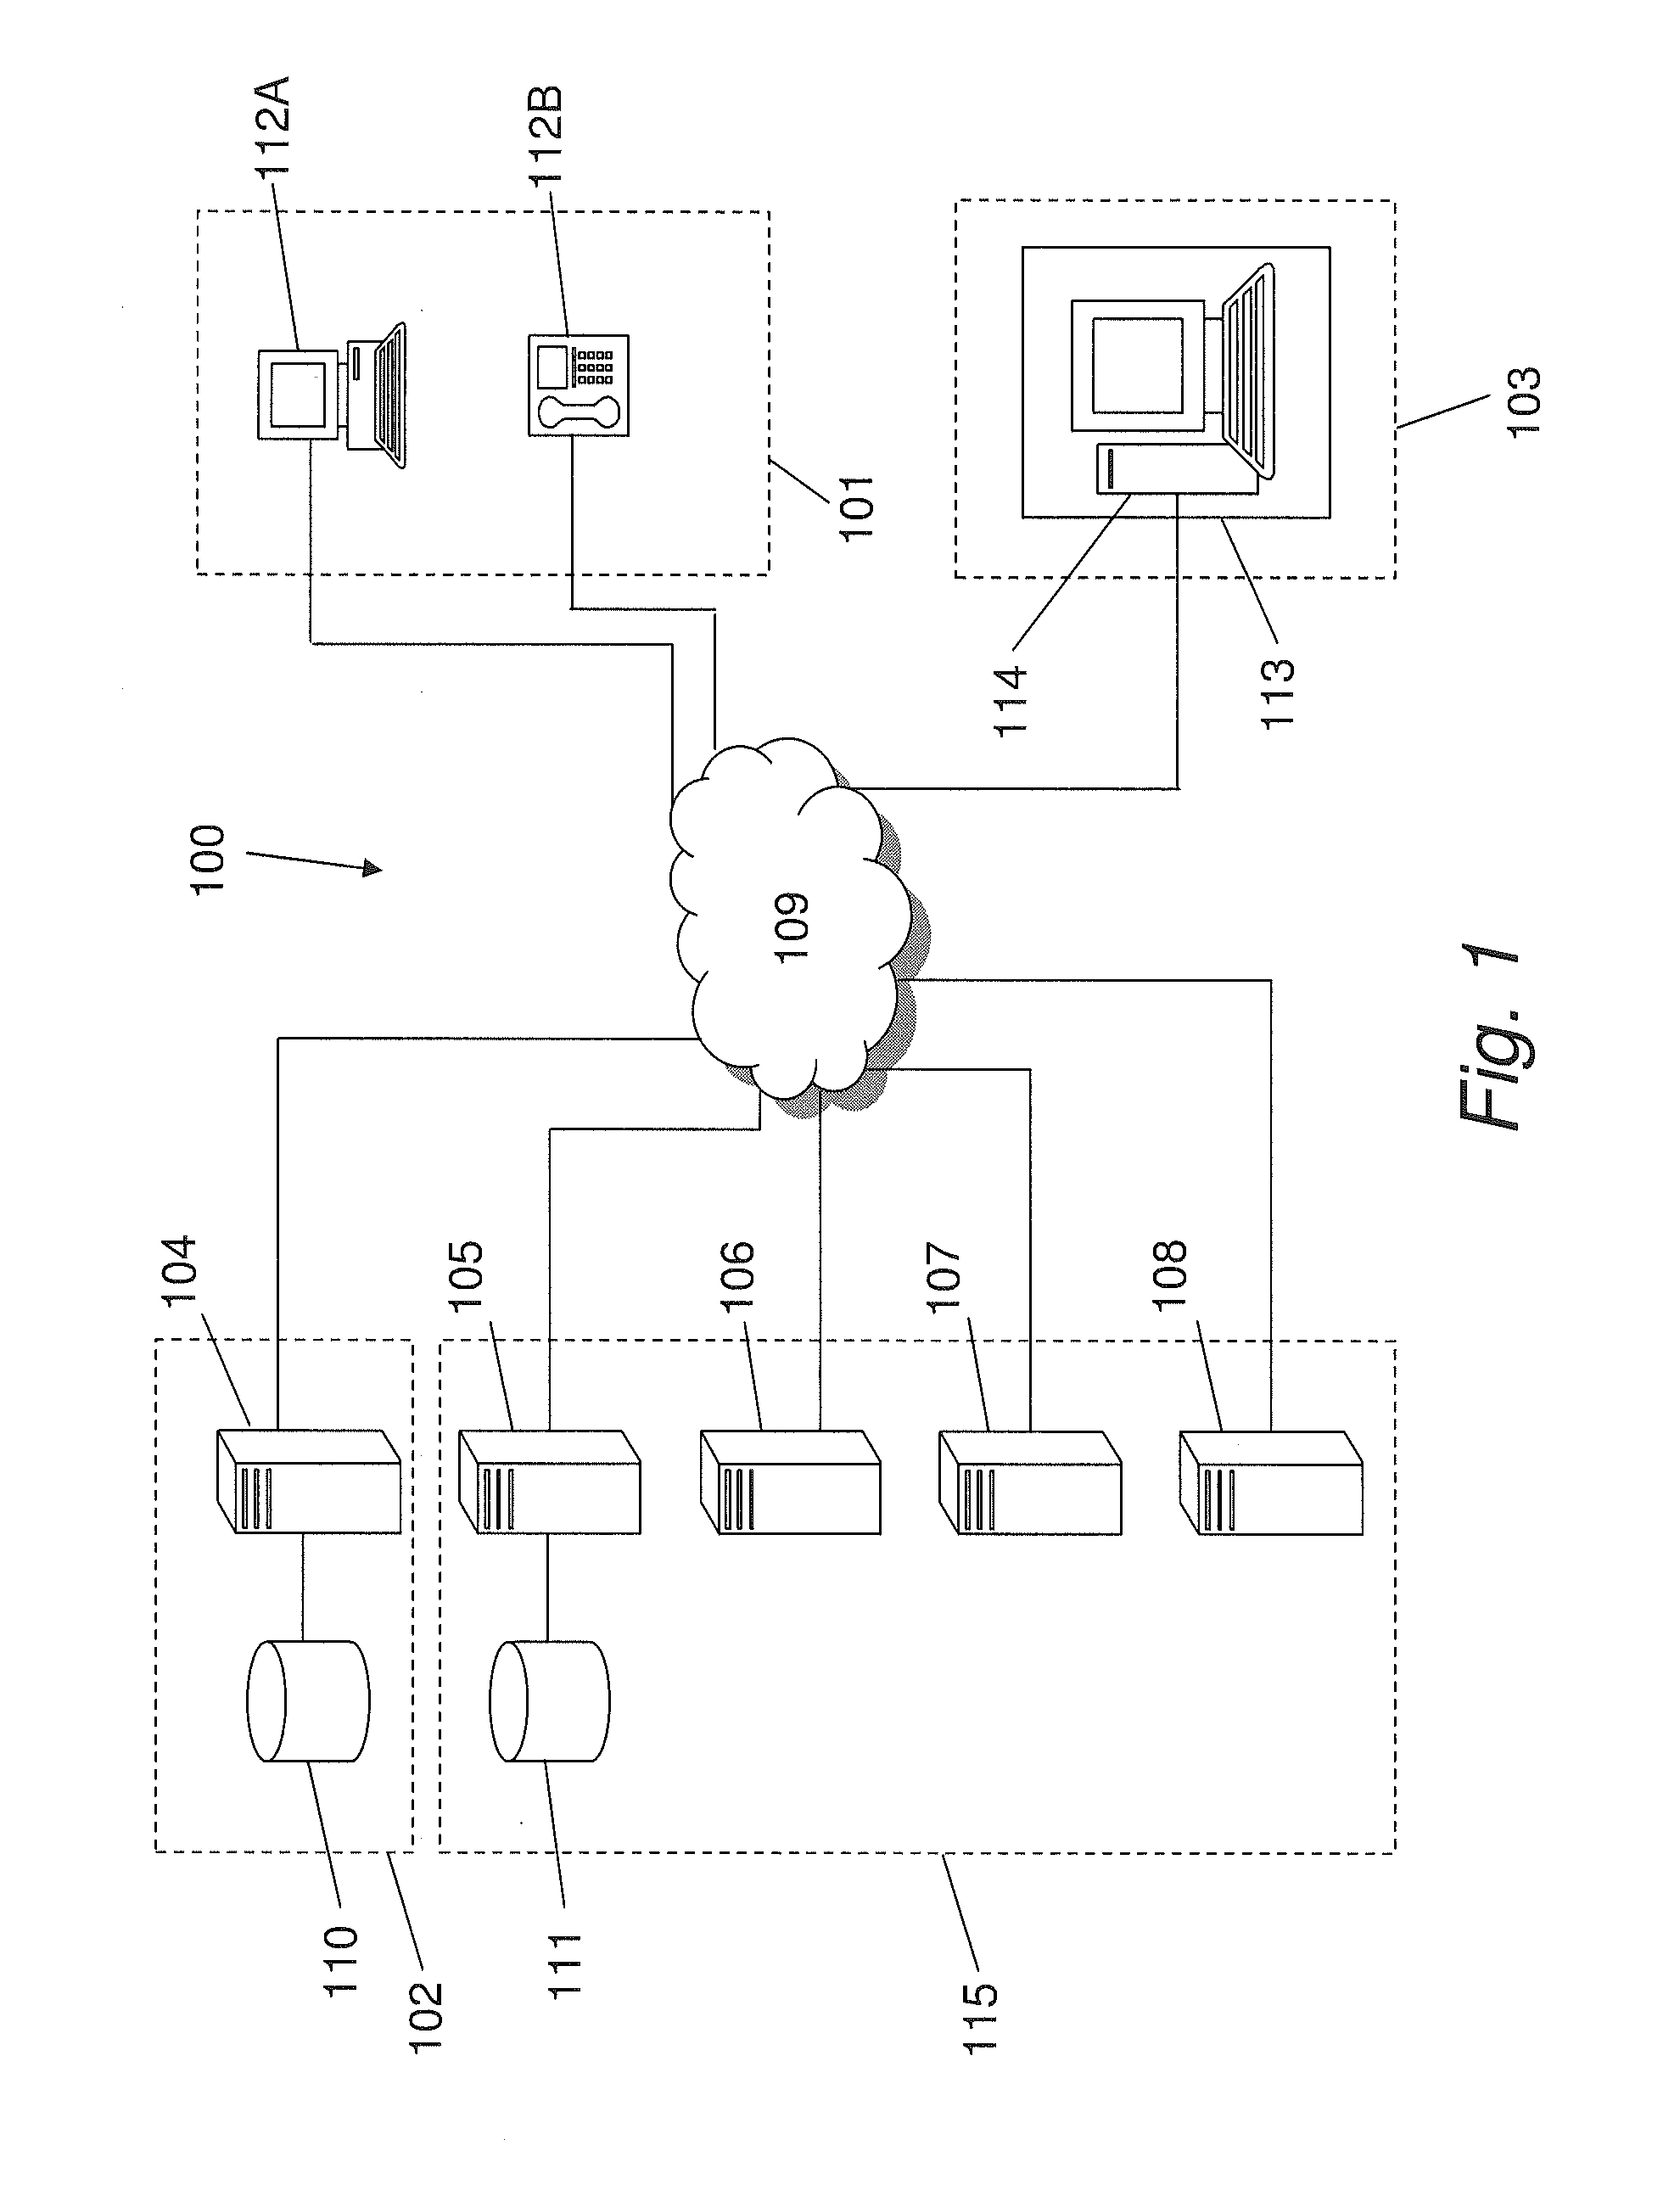 Method and database system for secure storage and communication of information